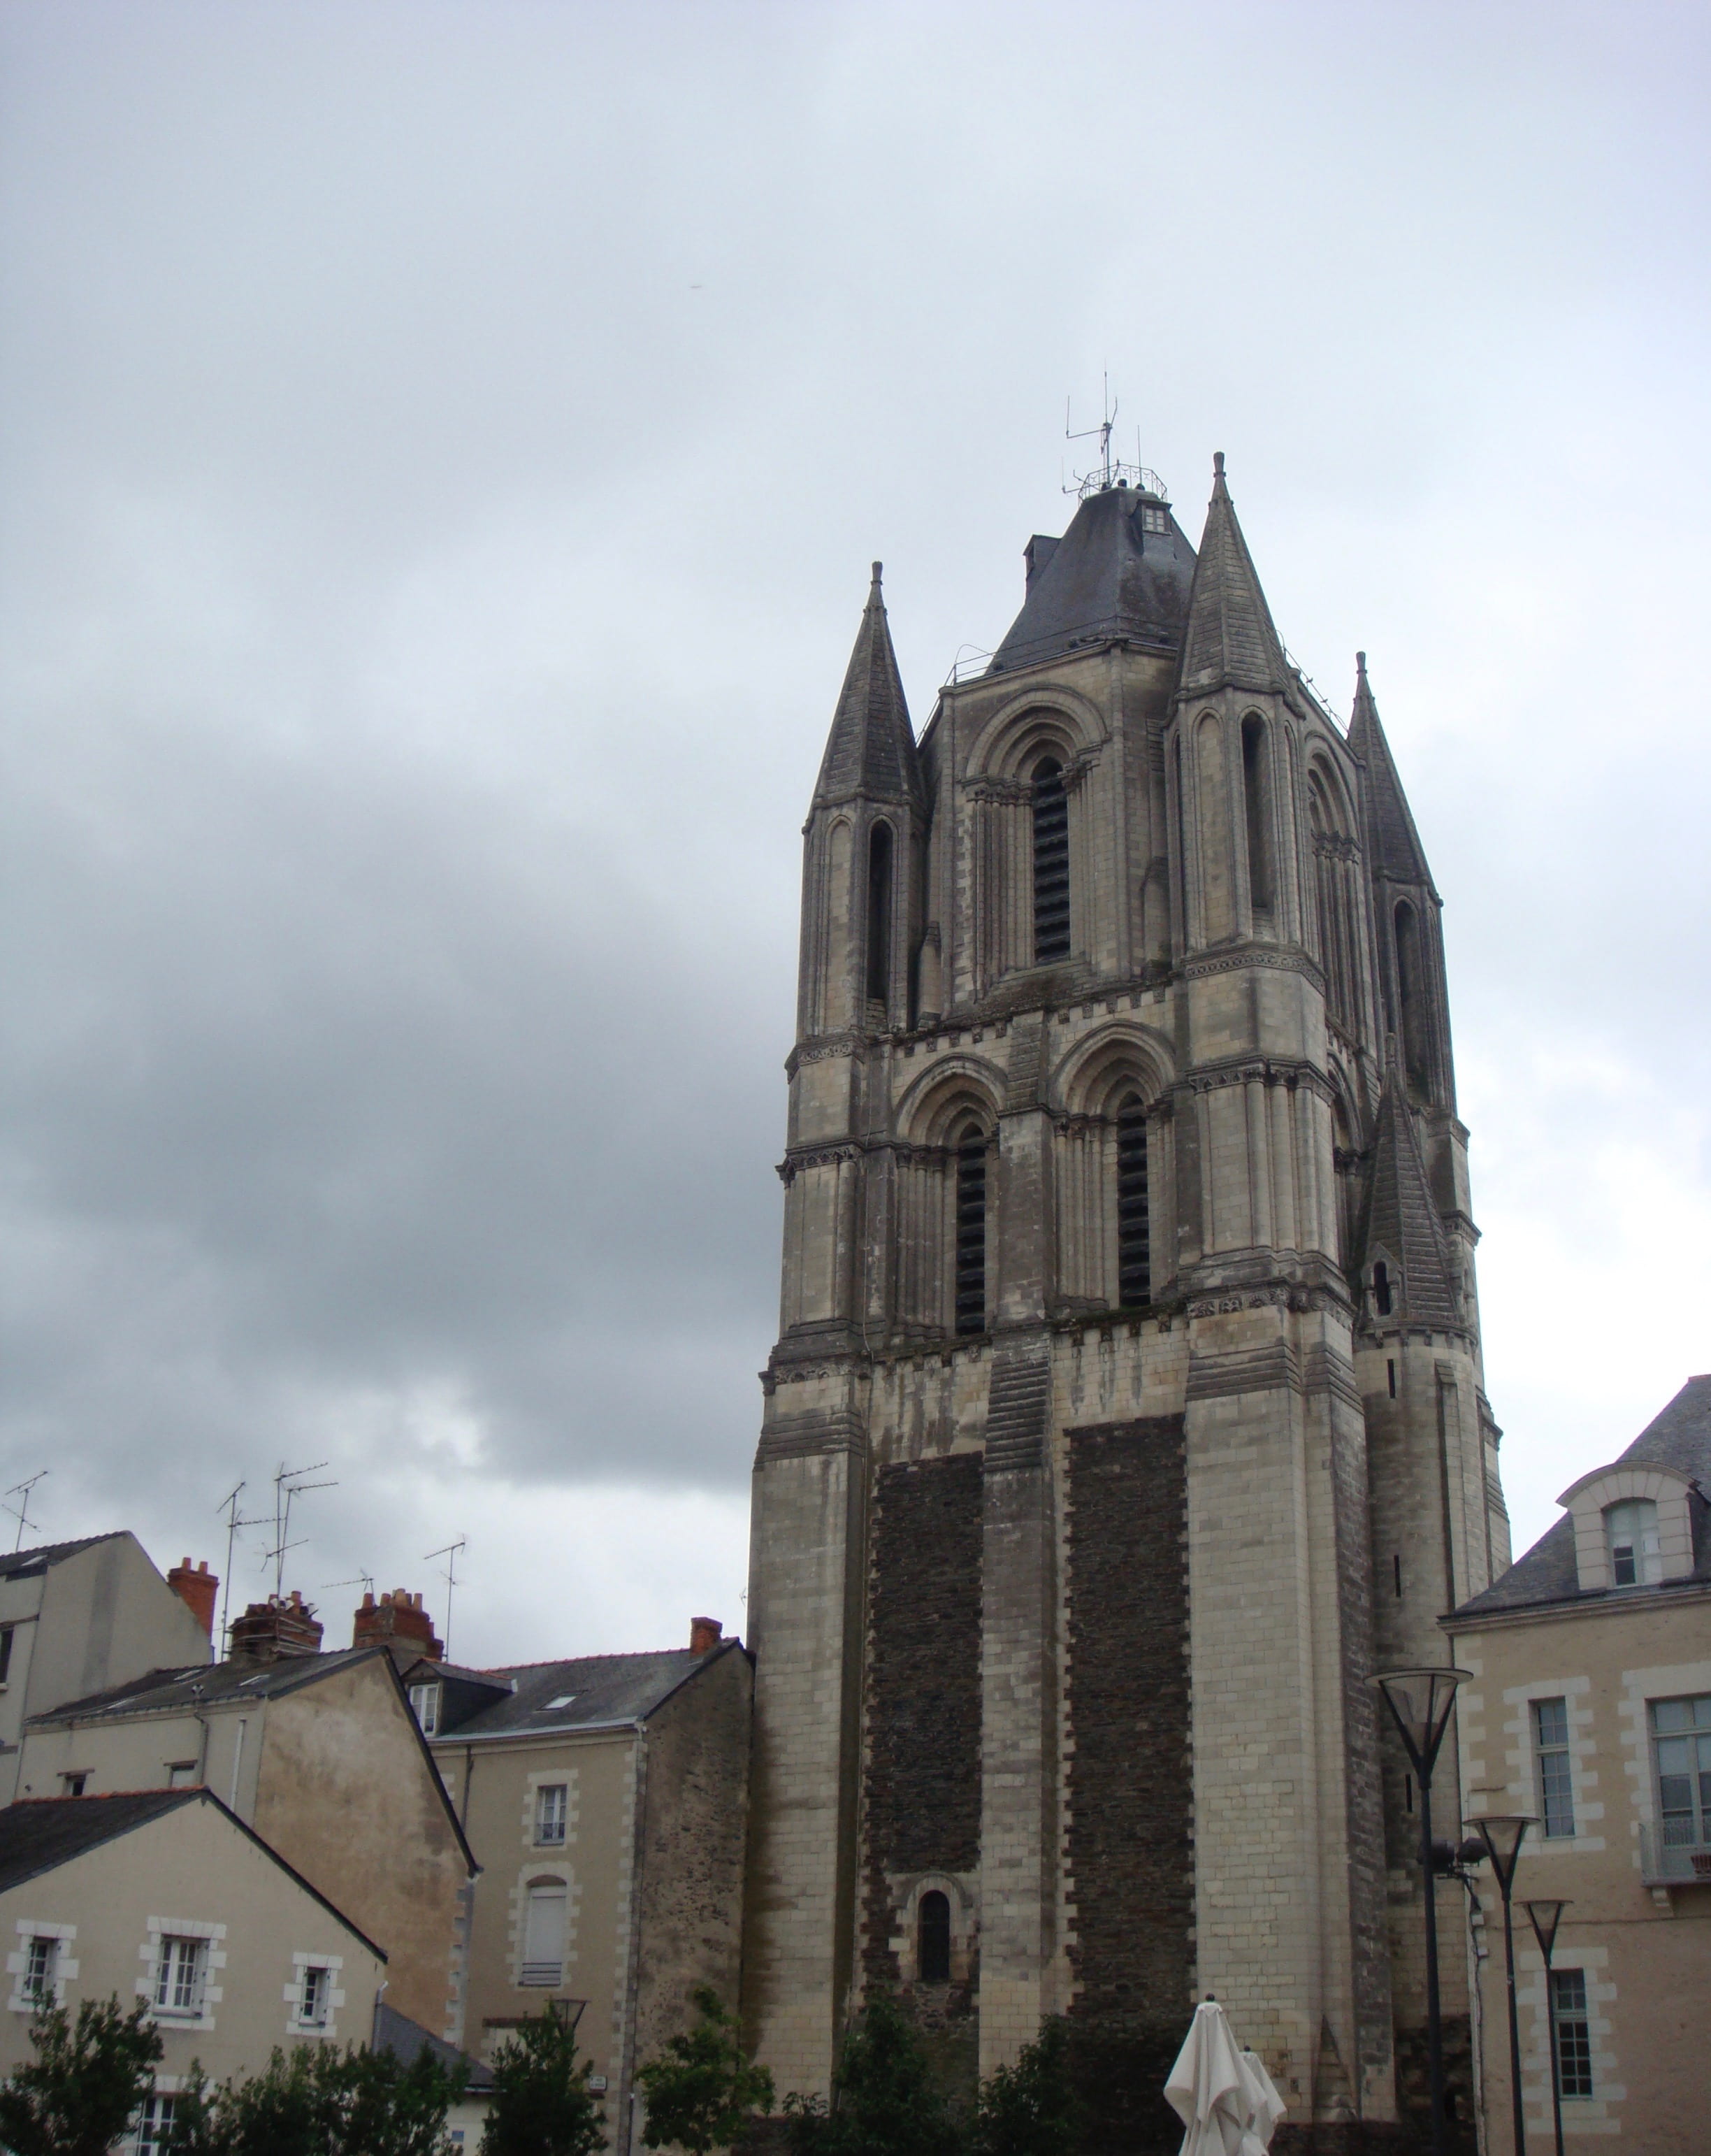 The Tower of Saint-Aubin is all that survives (in addition to part of the cloister, now part of the modern Préfecture de Maine-et-Loire) of the great Angevin abbey (© author)